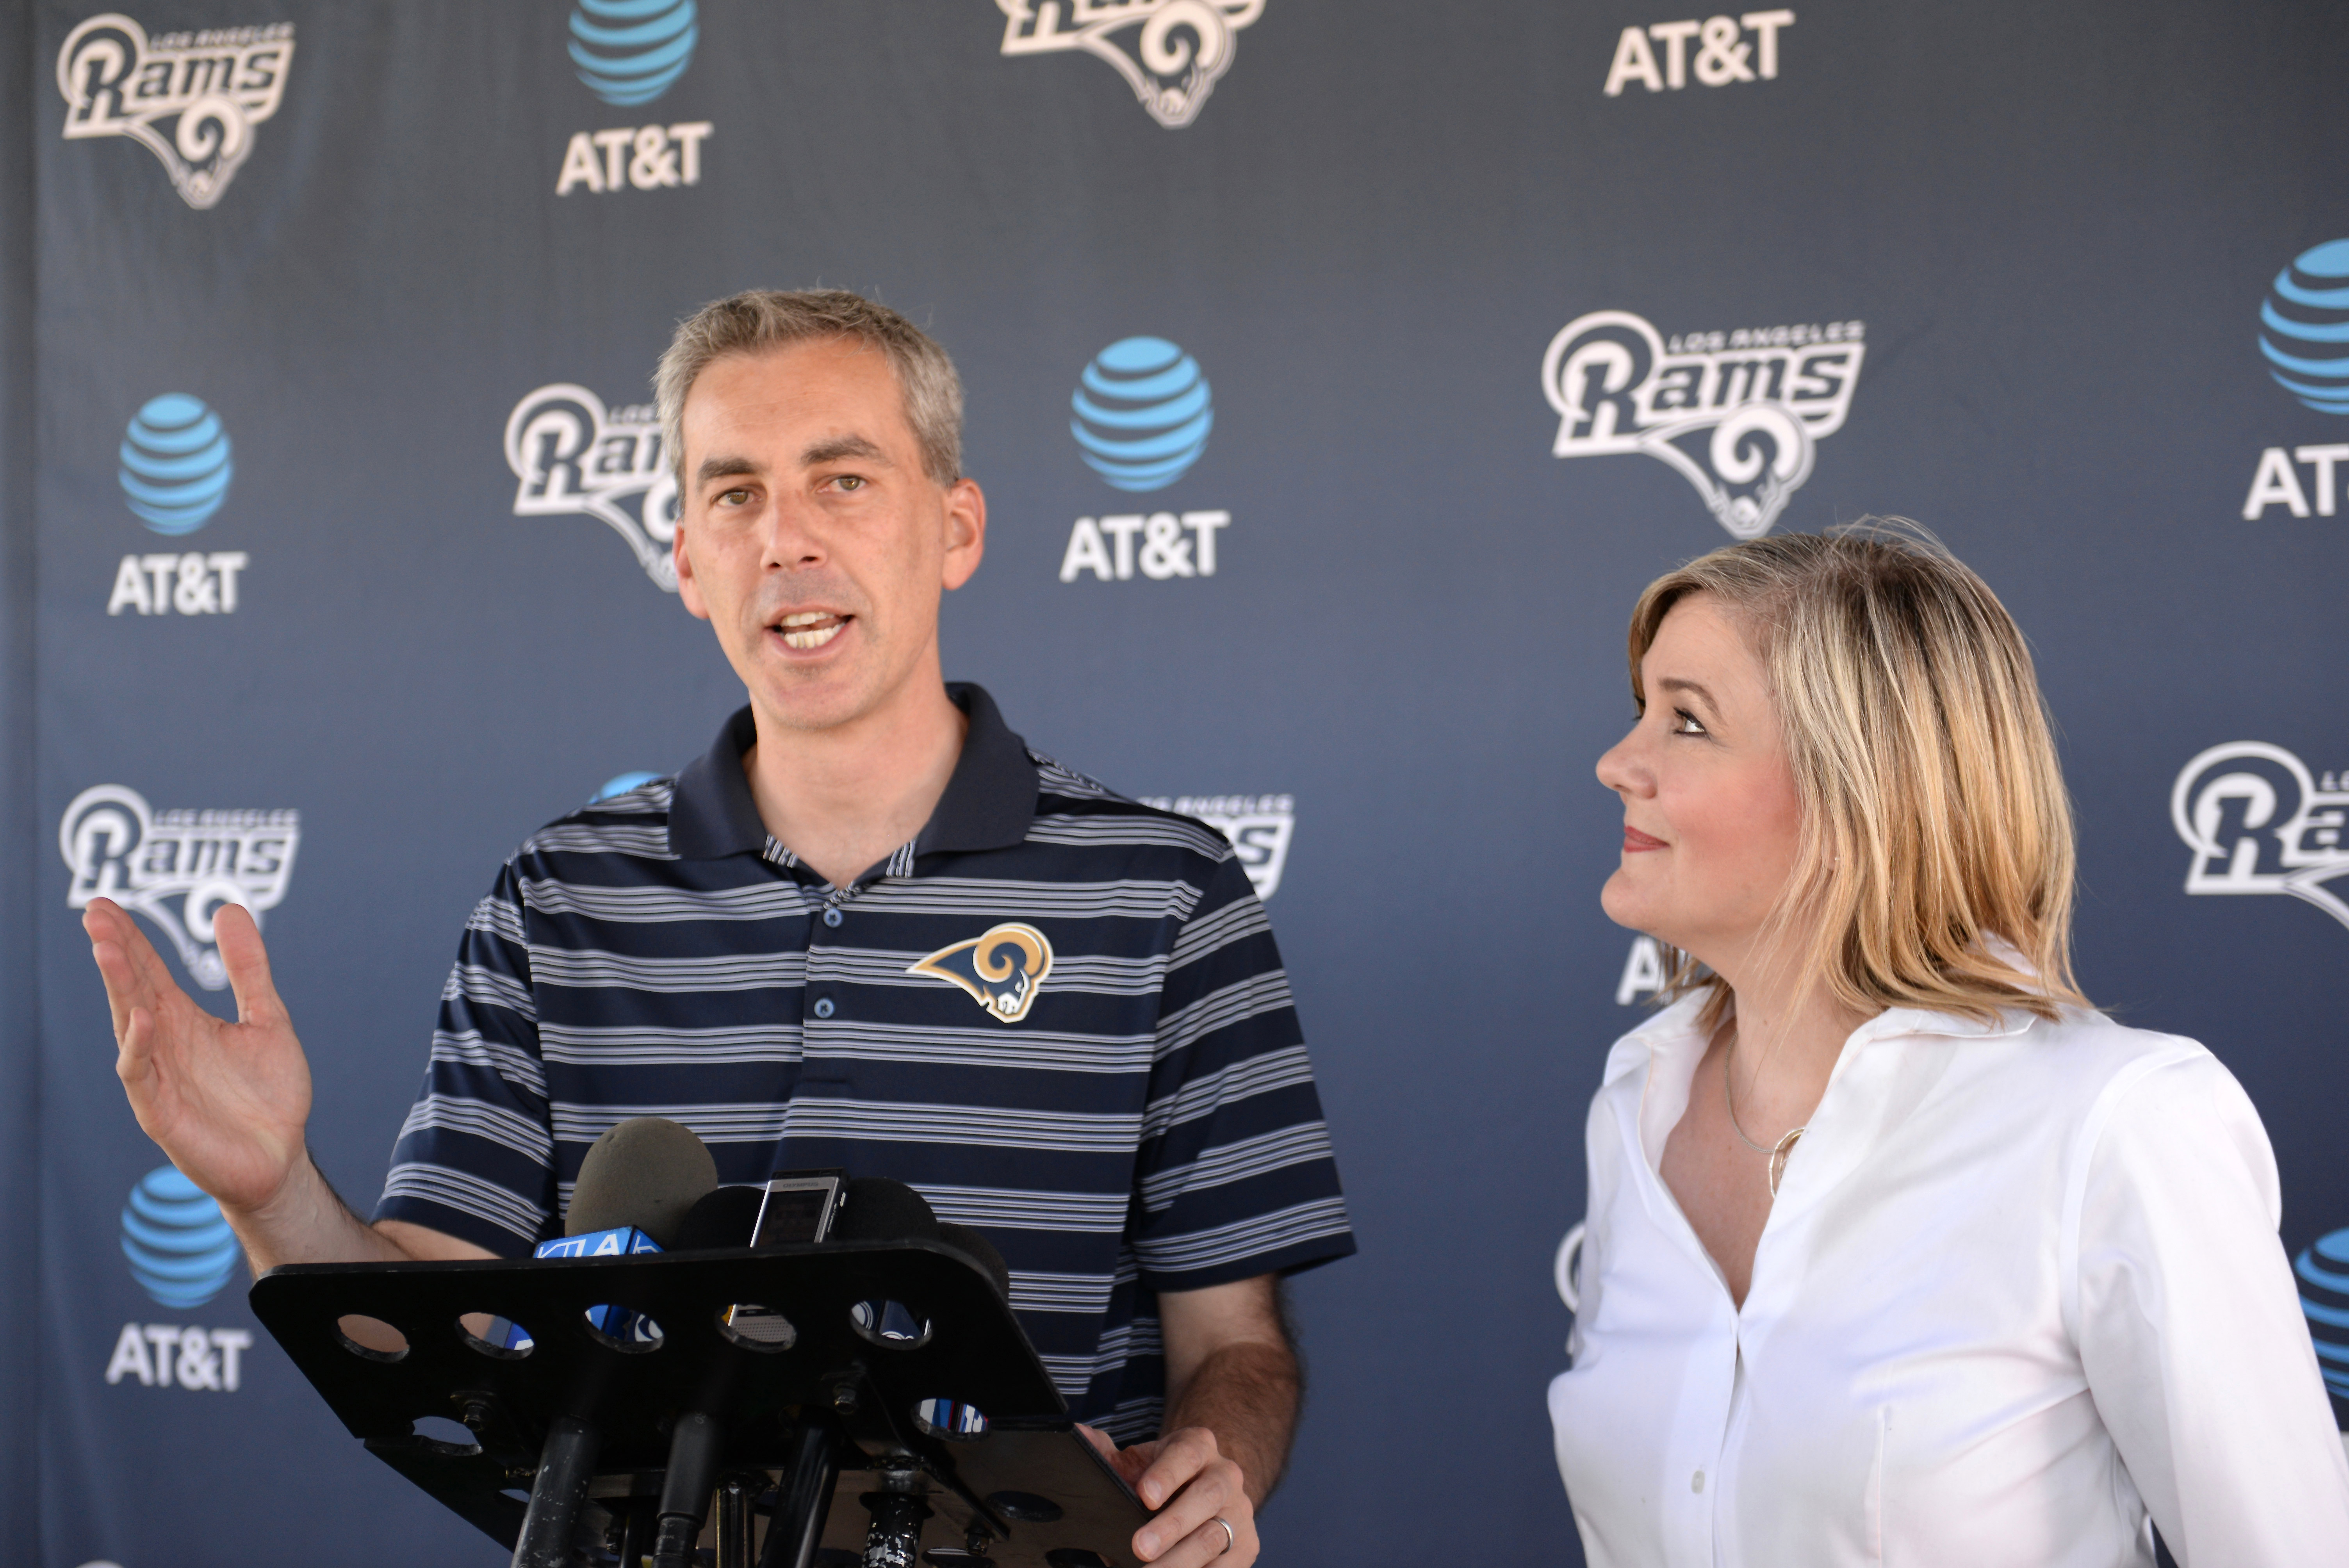 Kevin Demoff, COO of the Los Angeles Rams and United Way Campaign Chair, announces Rams commitment to use partnership with United Way to make positive changes in the L.A. community.